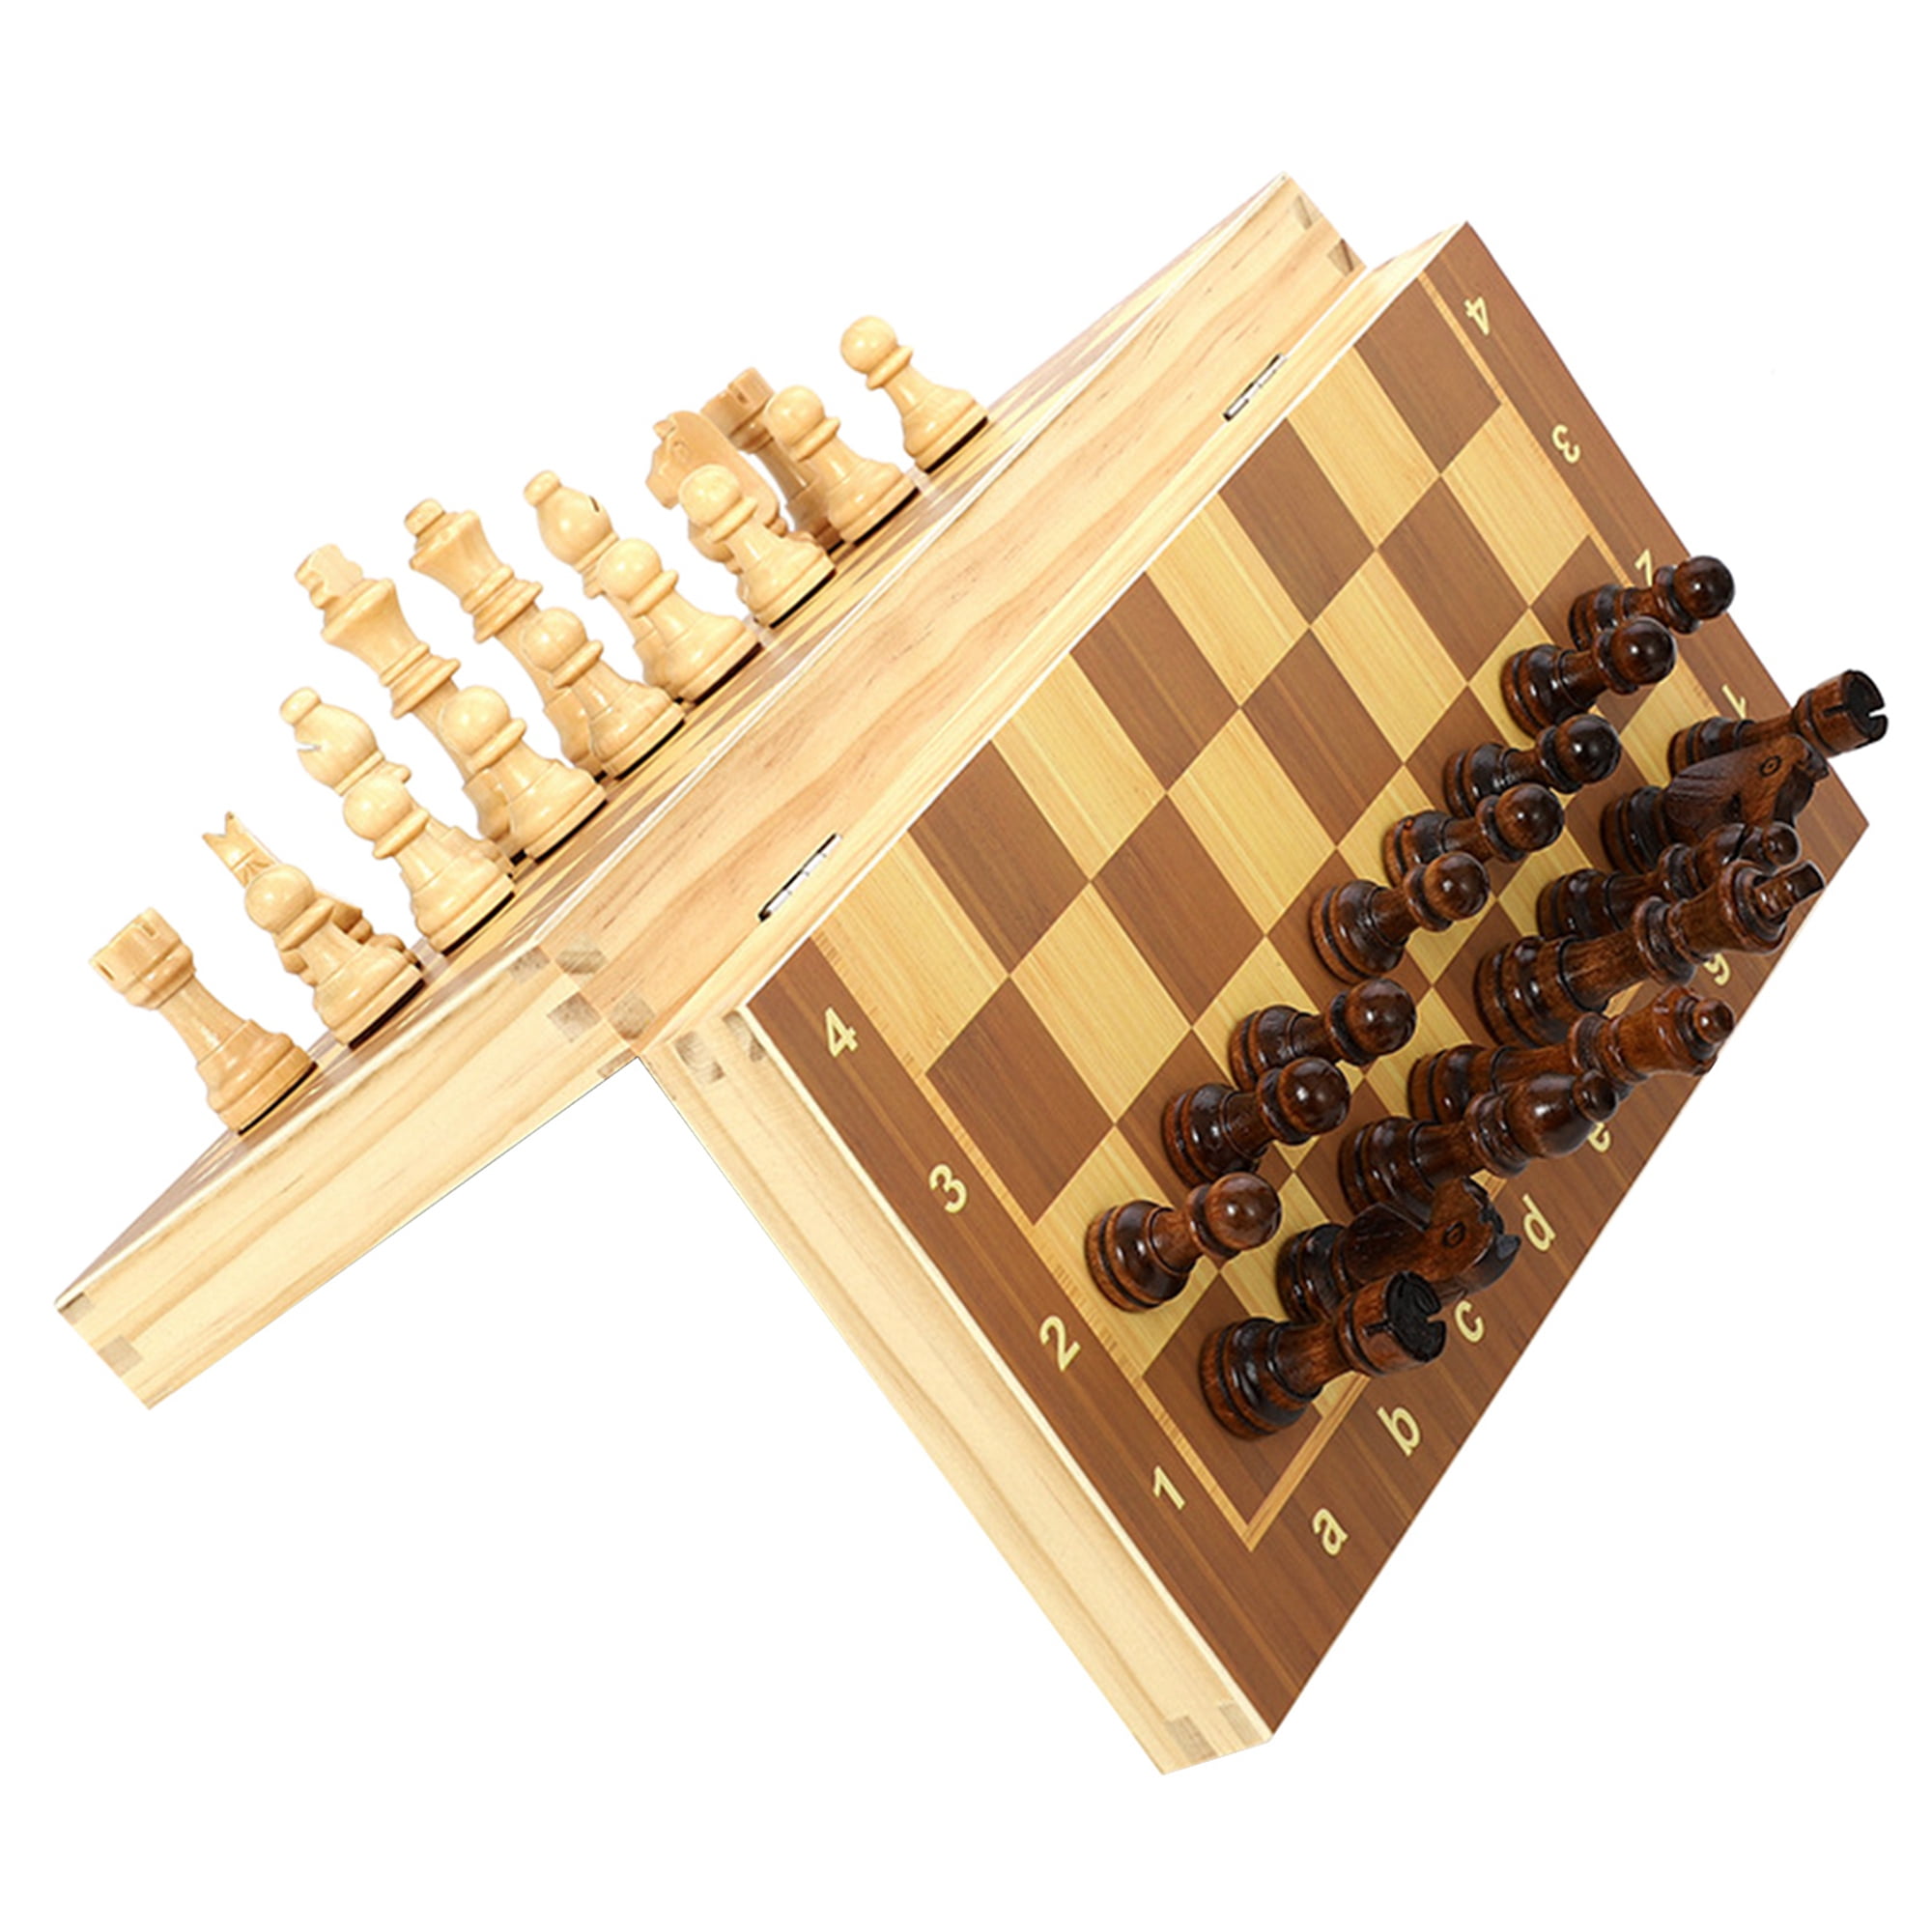 Chess Wooden Set Folding Chessboard Magnetic Pieces Wood Board Game Toys 24CM 